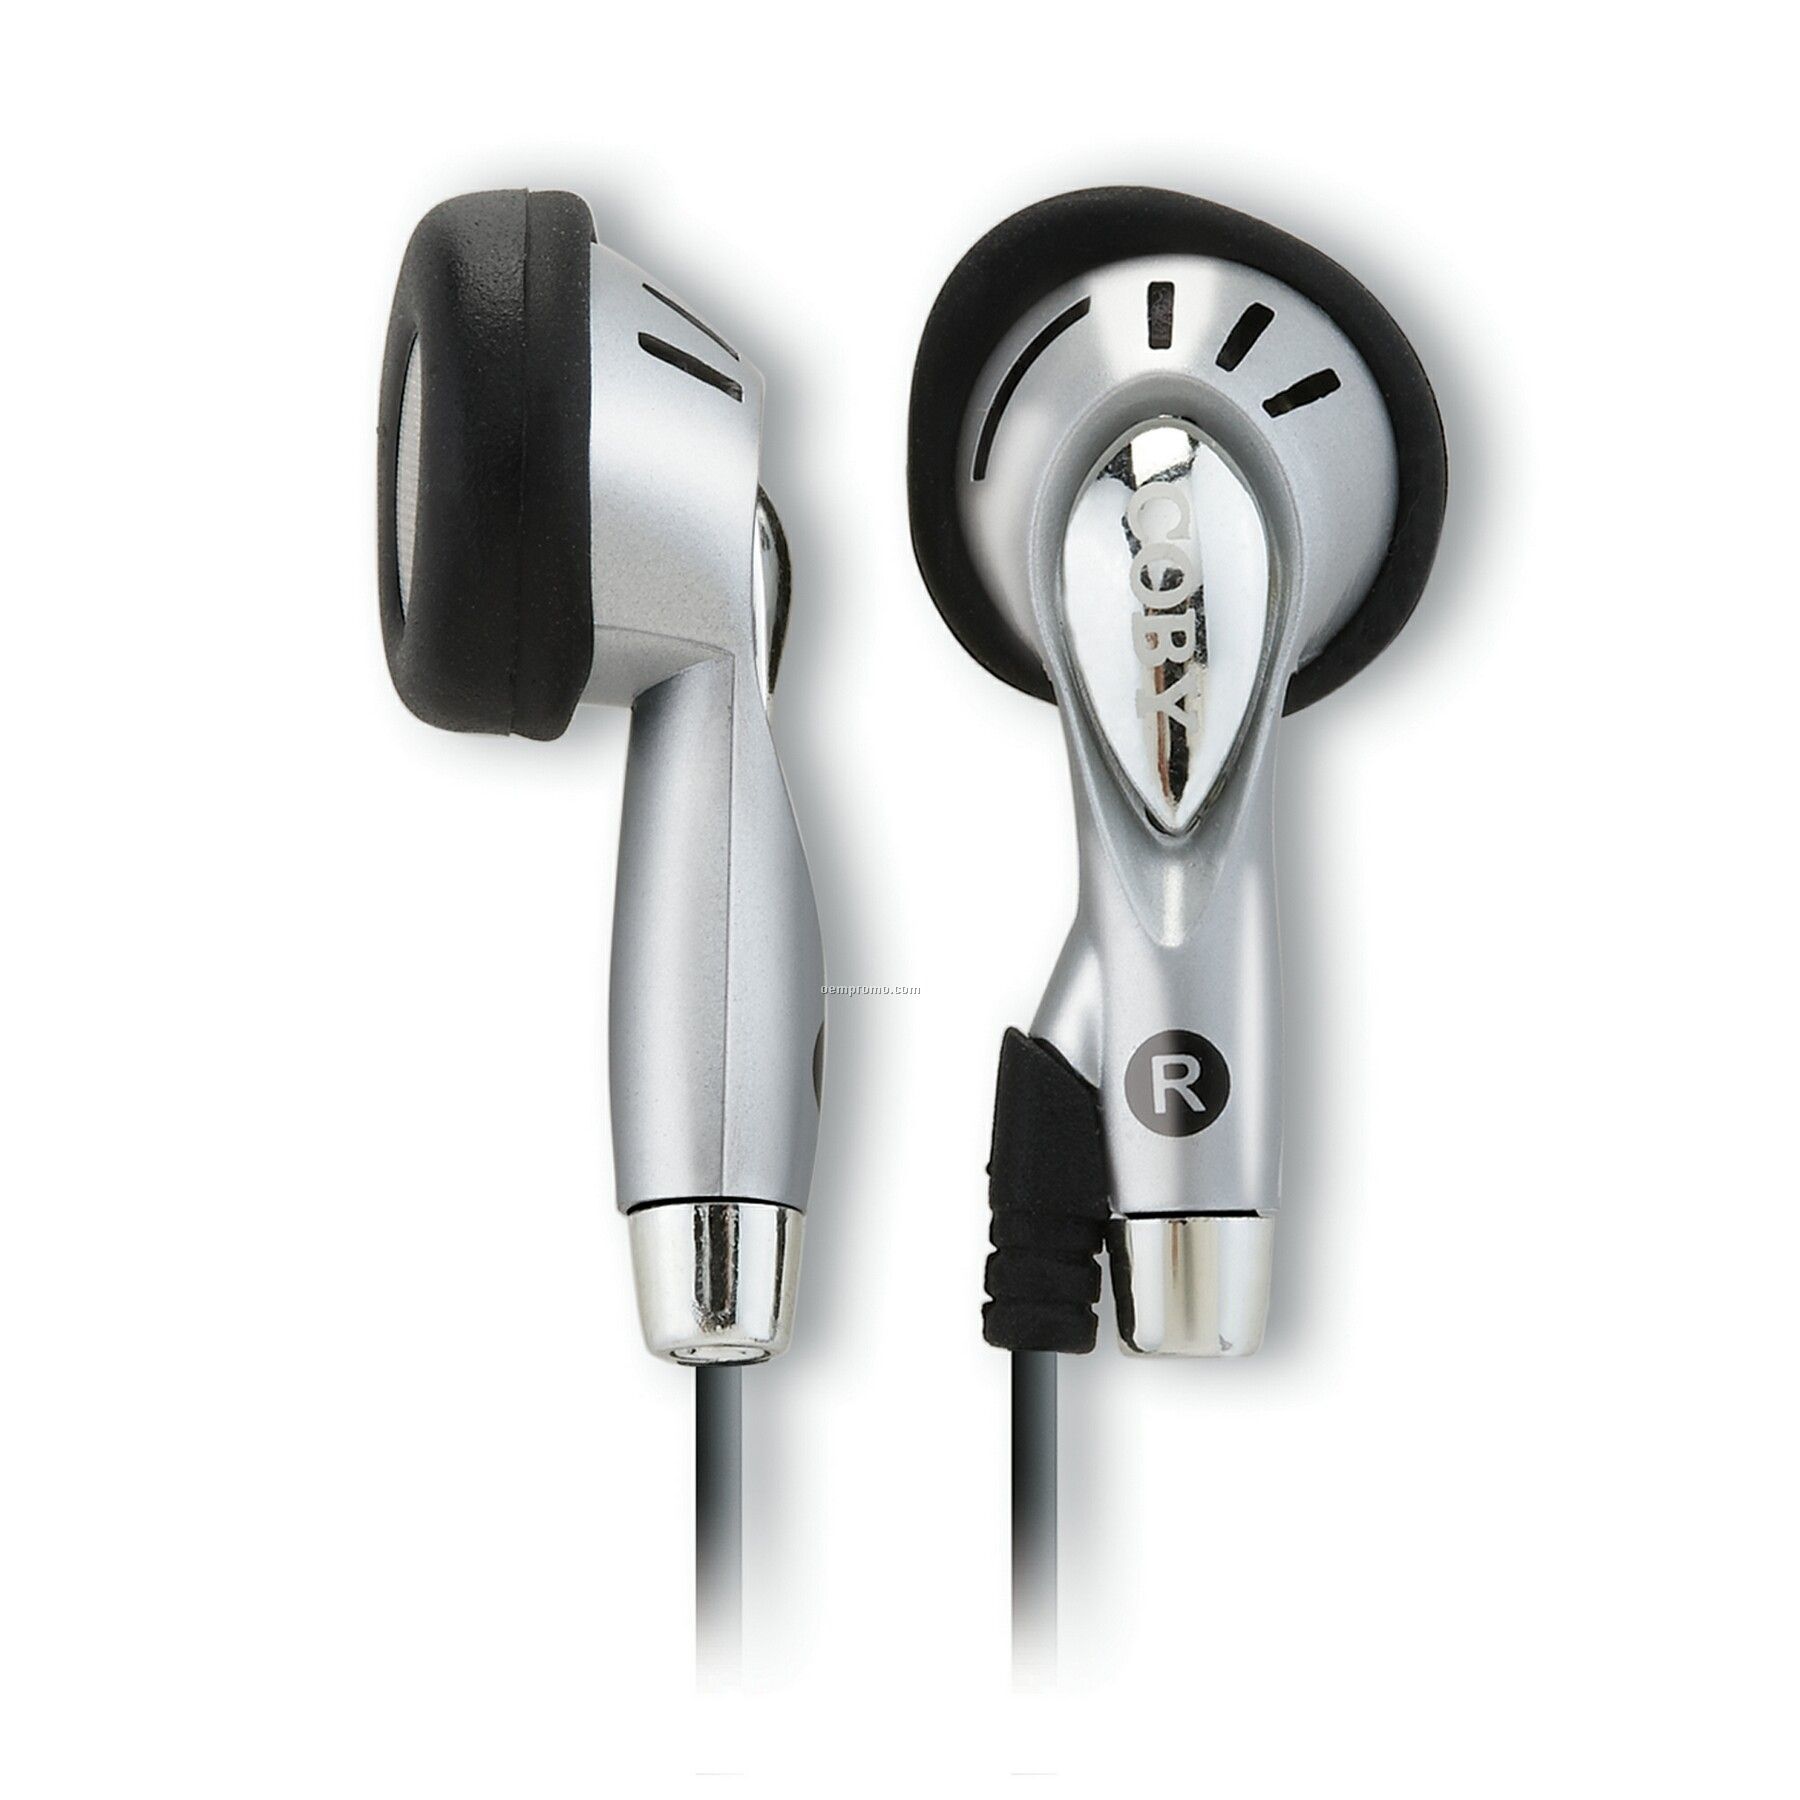 Deep Bass Stereo Earphones With Carrying Case